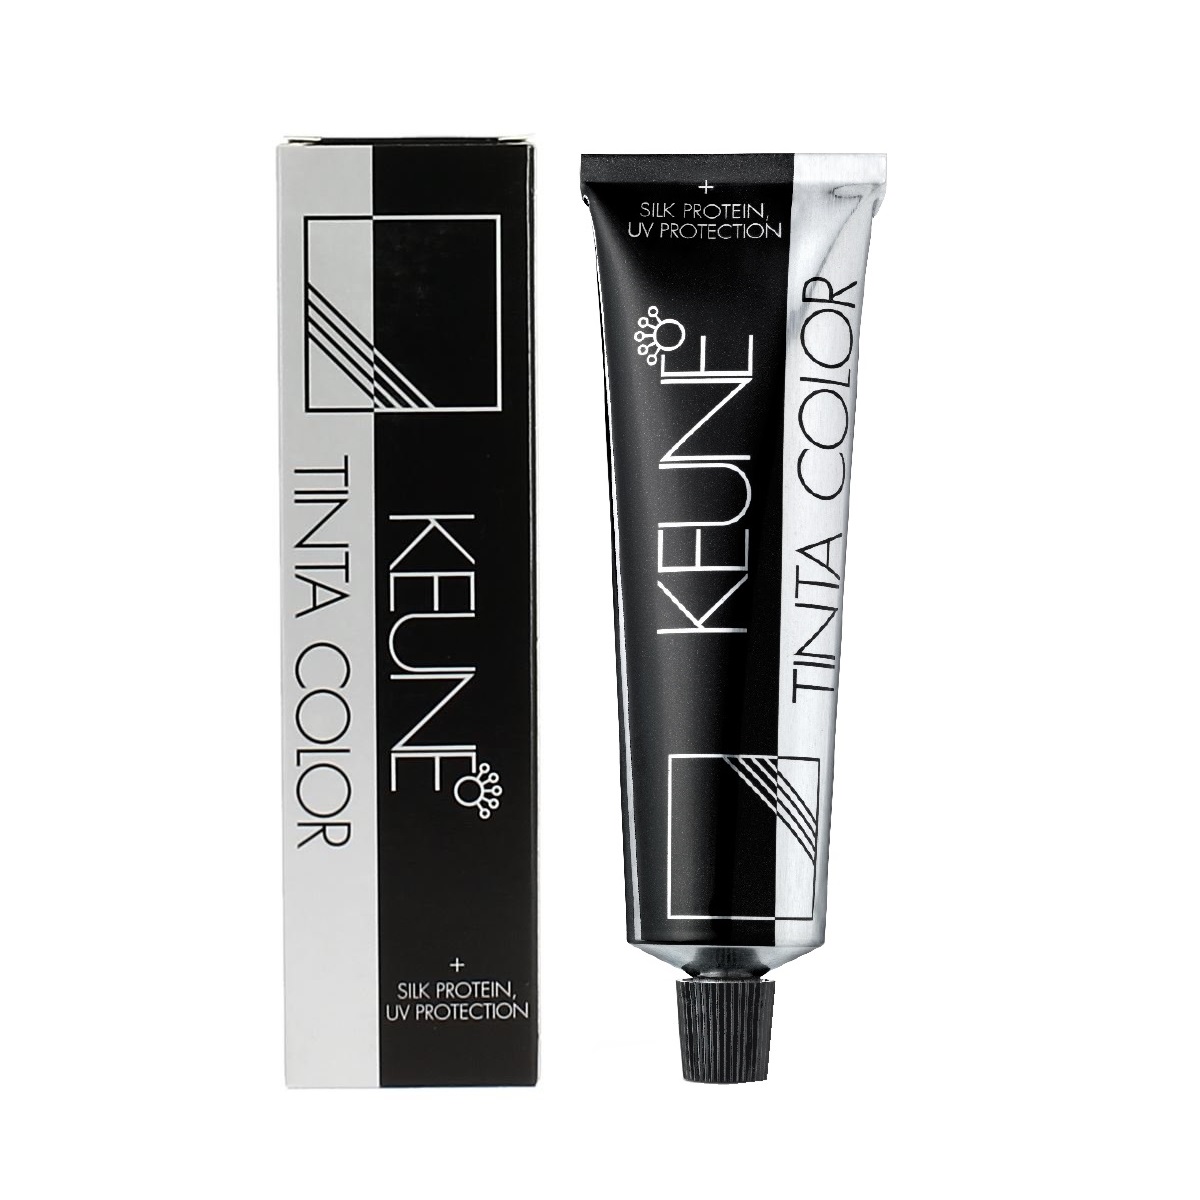 Keune Tinta Color Permanent Hair Color 2.1oz Choose your Color ( Shade:5.35- Light Choco Brown;) - image 2 of 2